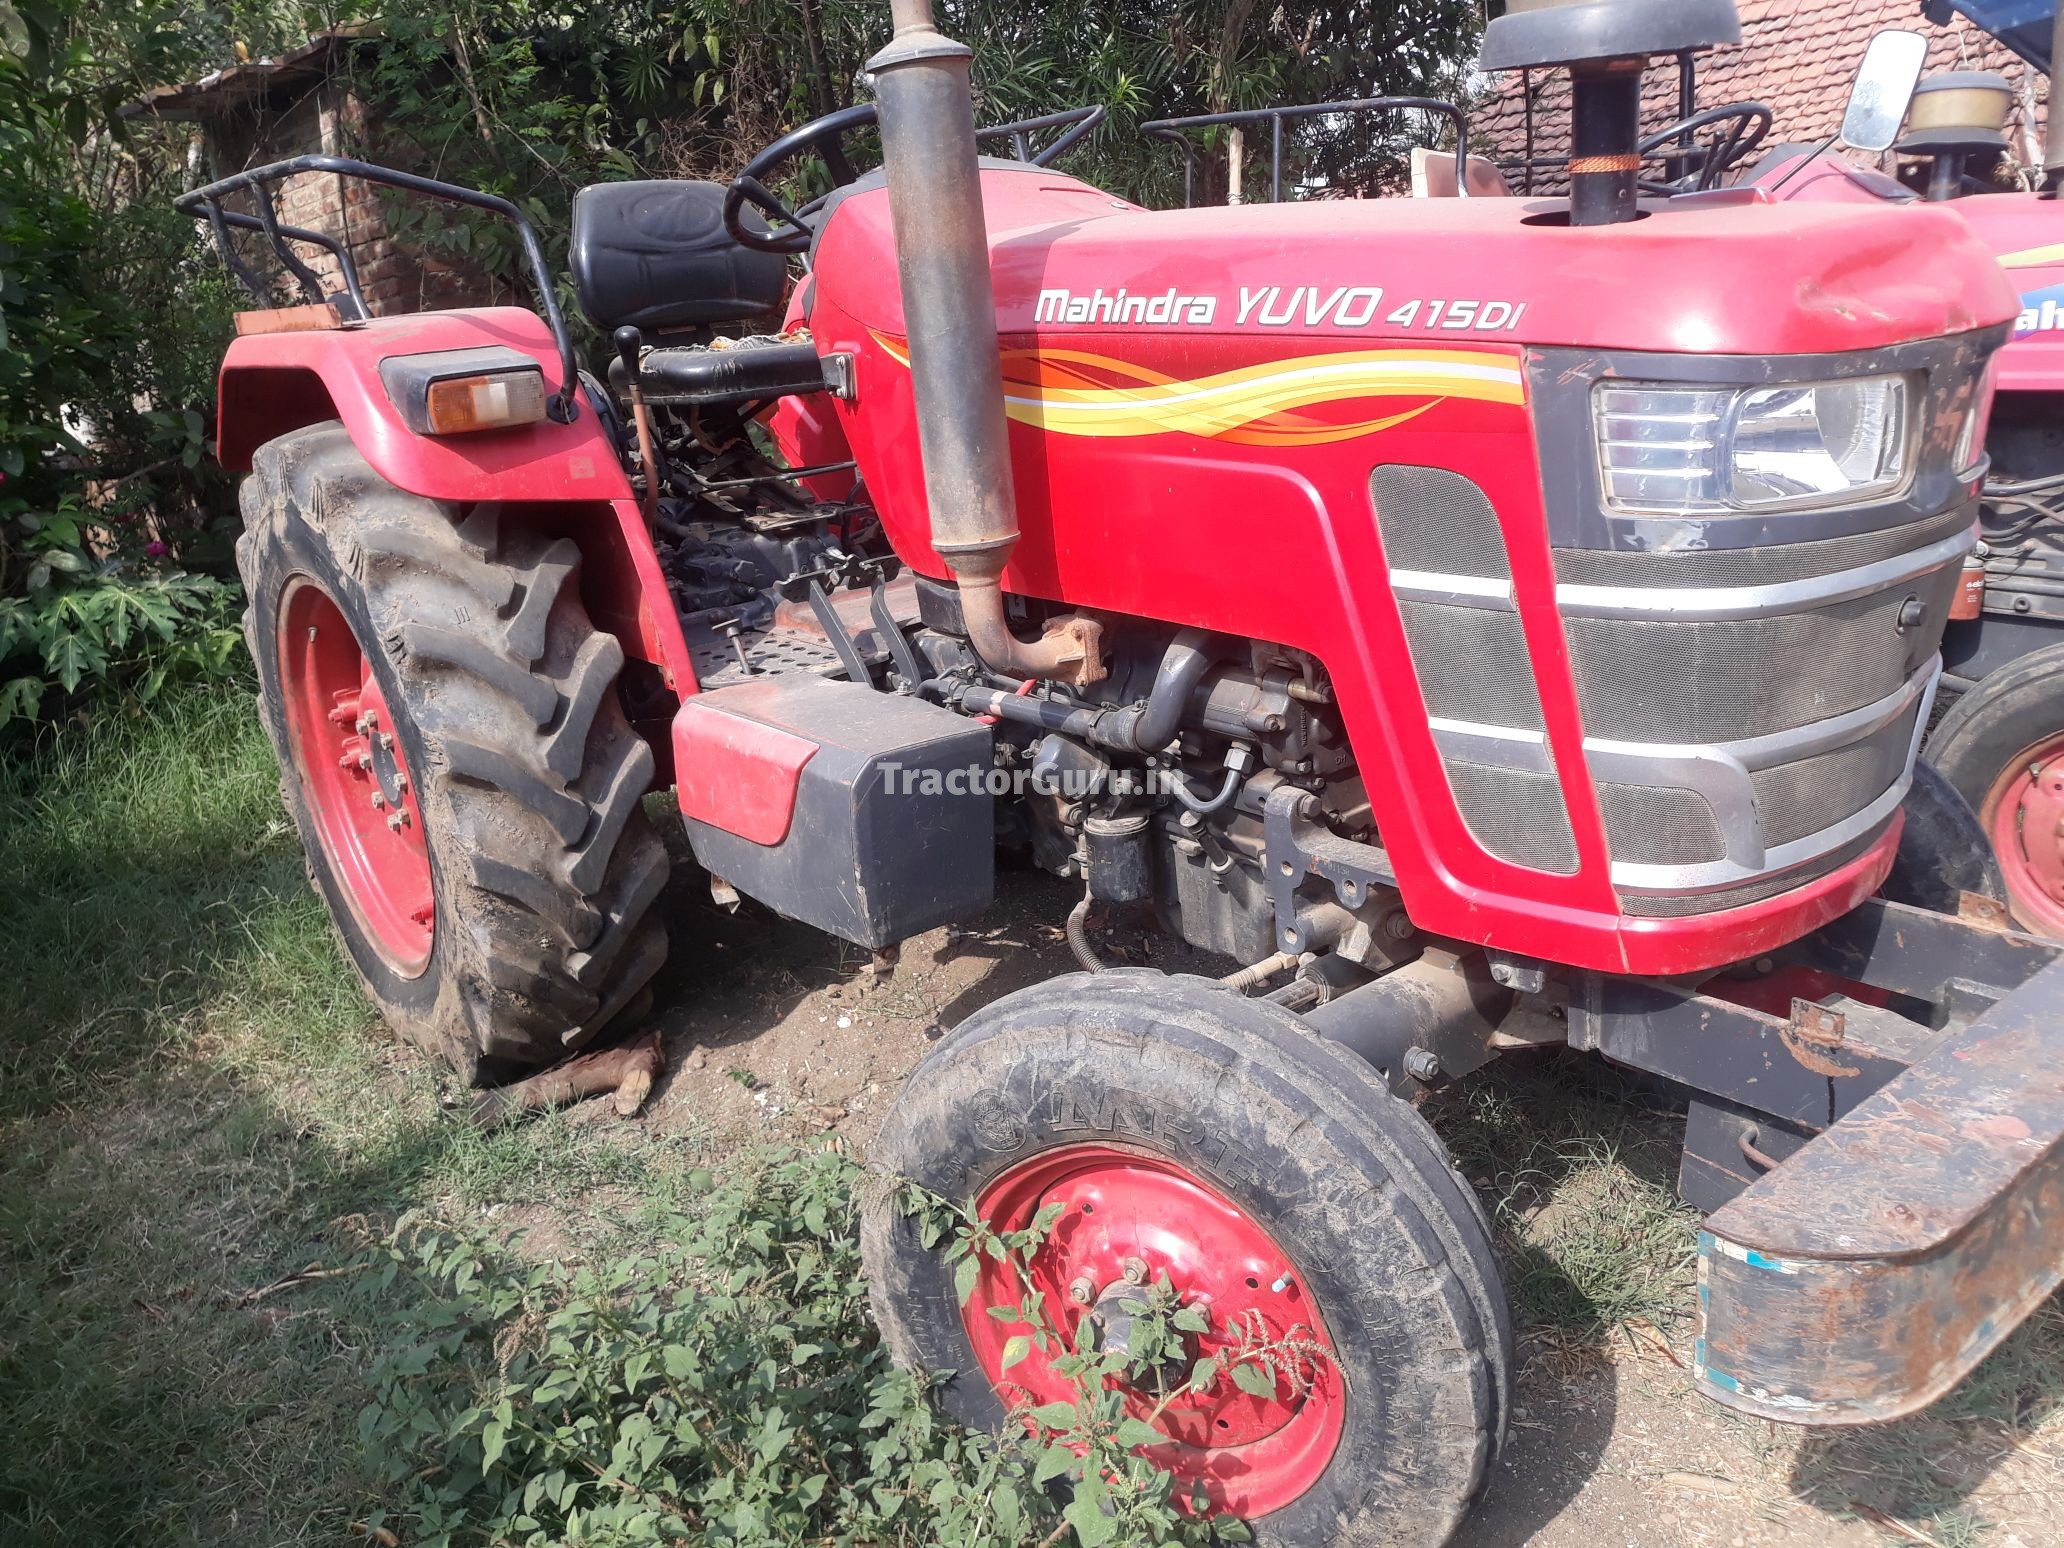 Get Second Hand Mahindra 415 DI YUVO Tractor in Good Condition - 6305